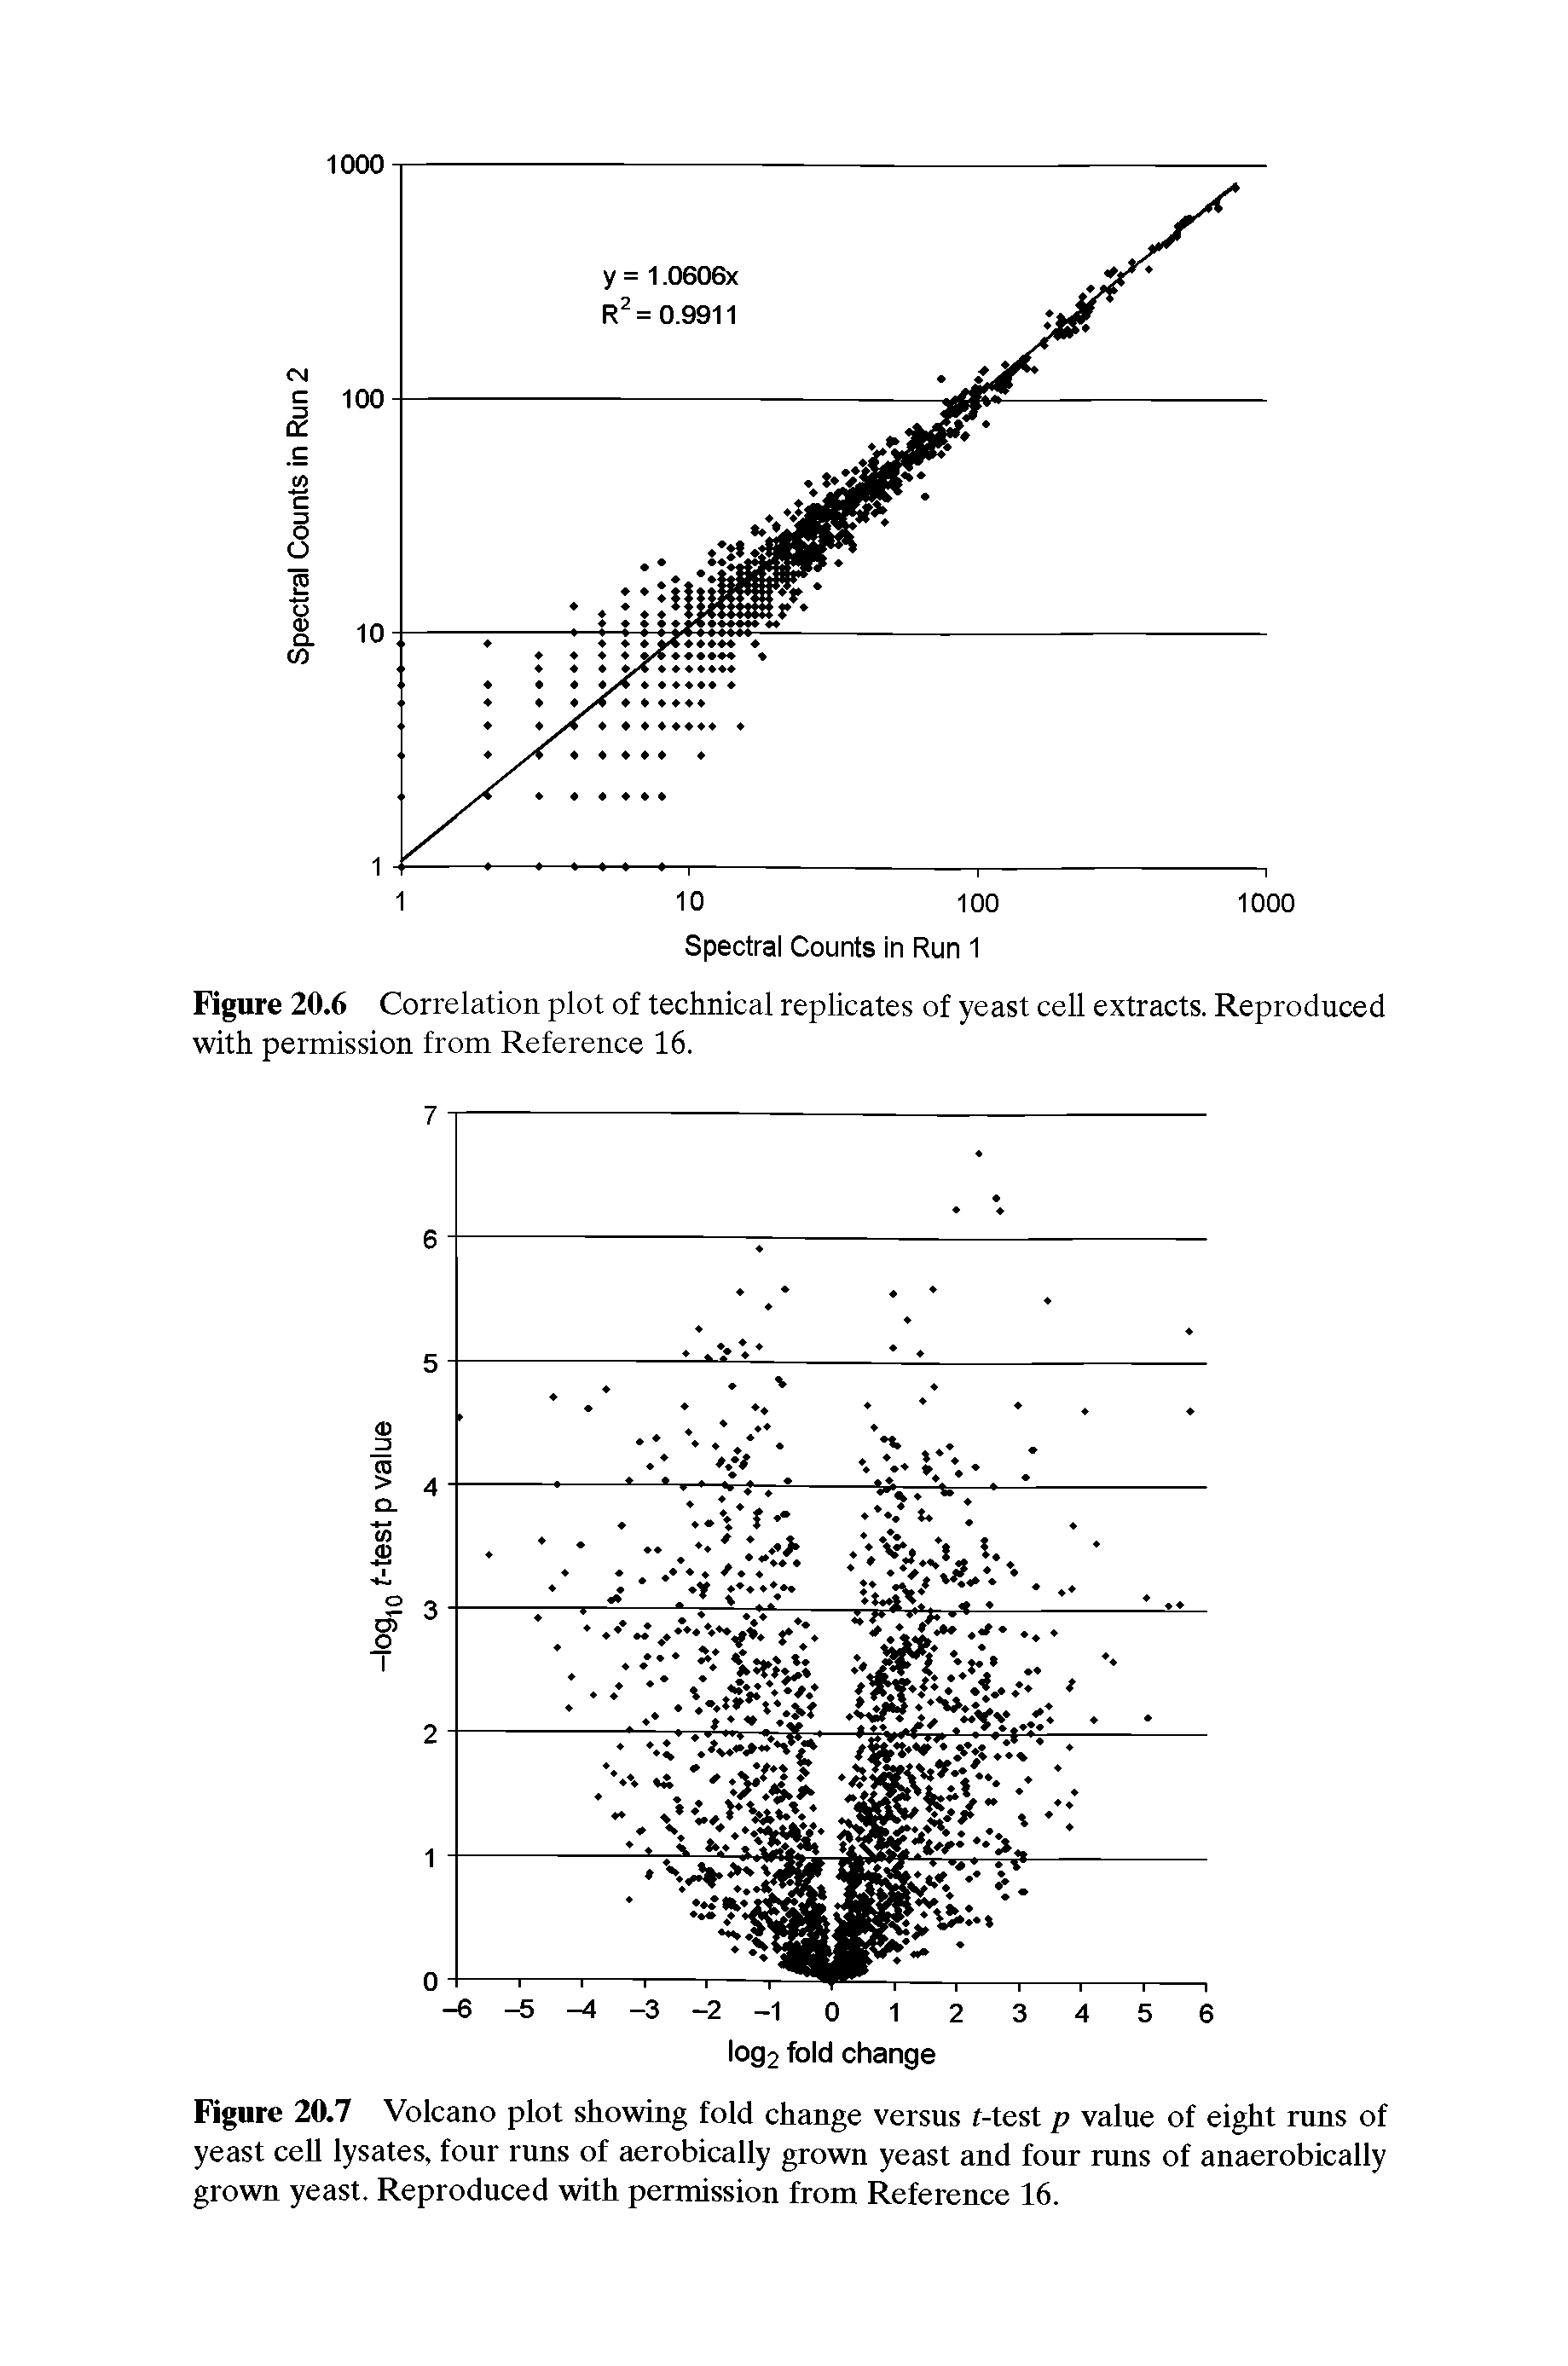 Figure 20.6 Correlation plot of technical replicates of yeast cell extracts. Reproduced with permission from Reference 16.